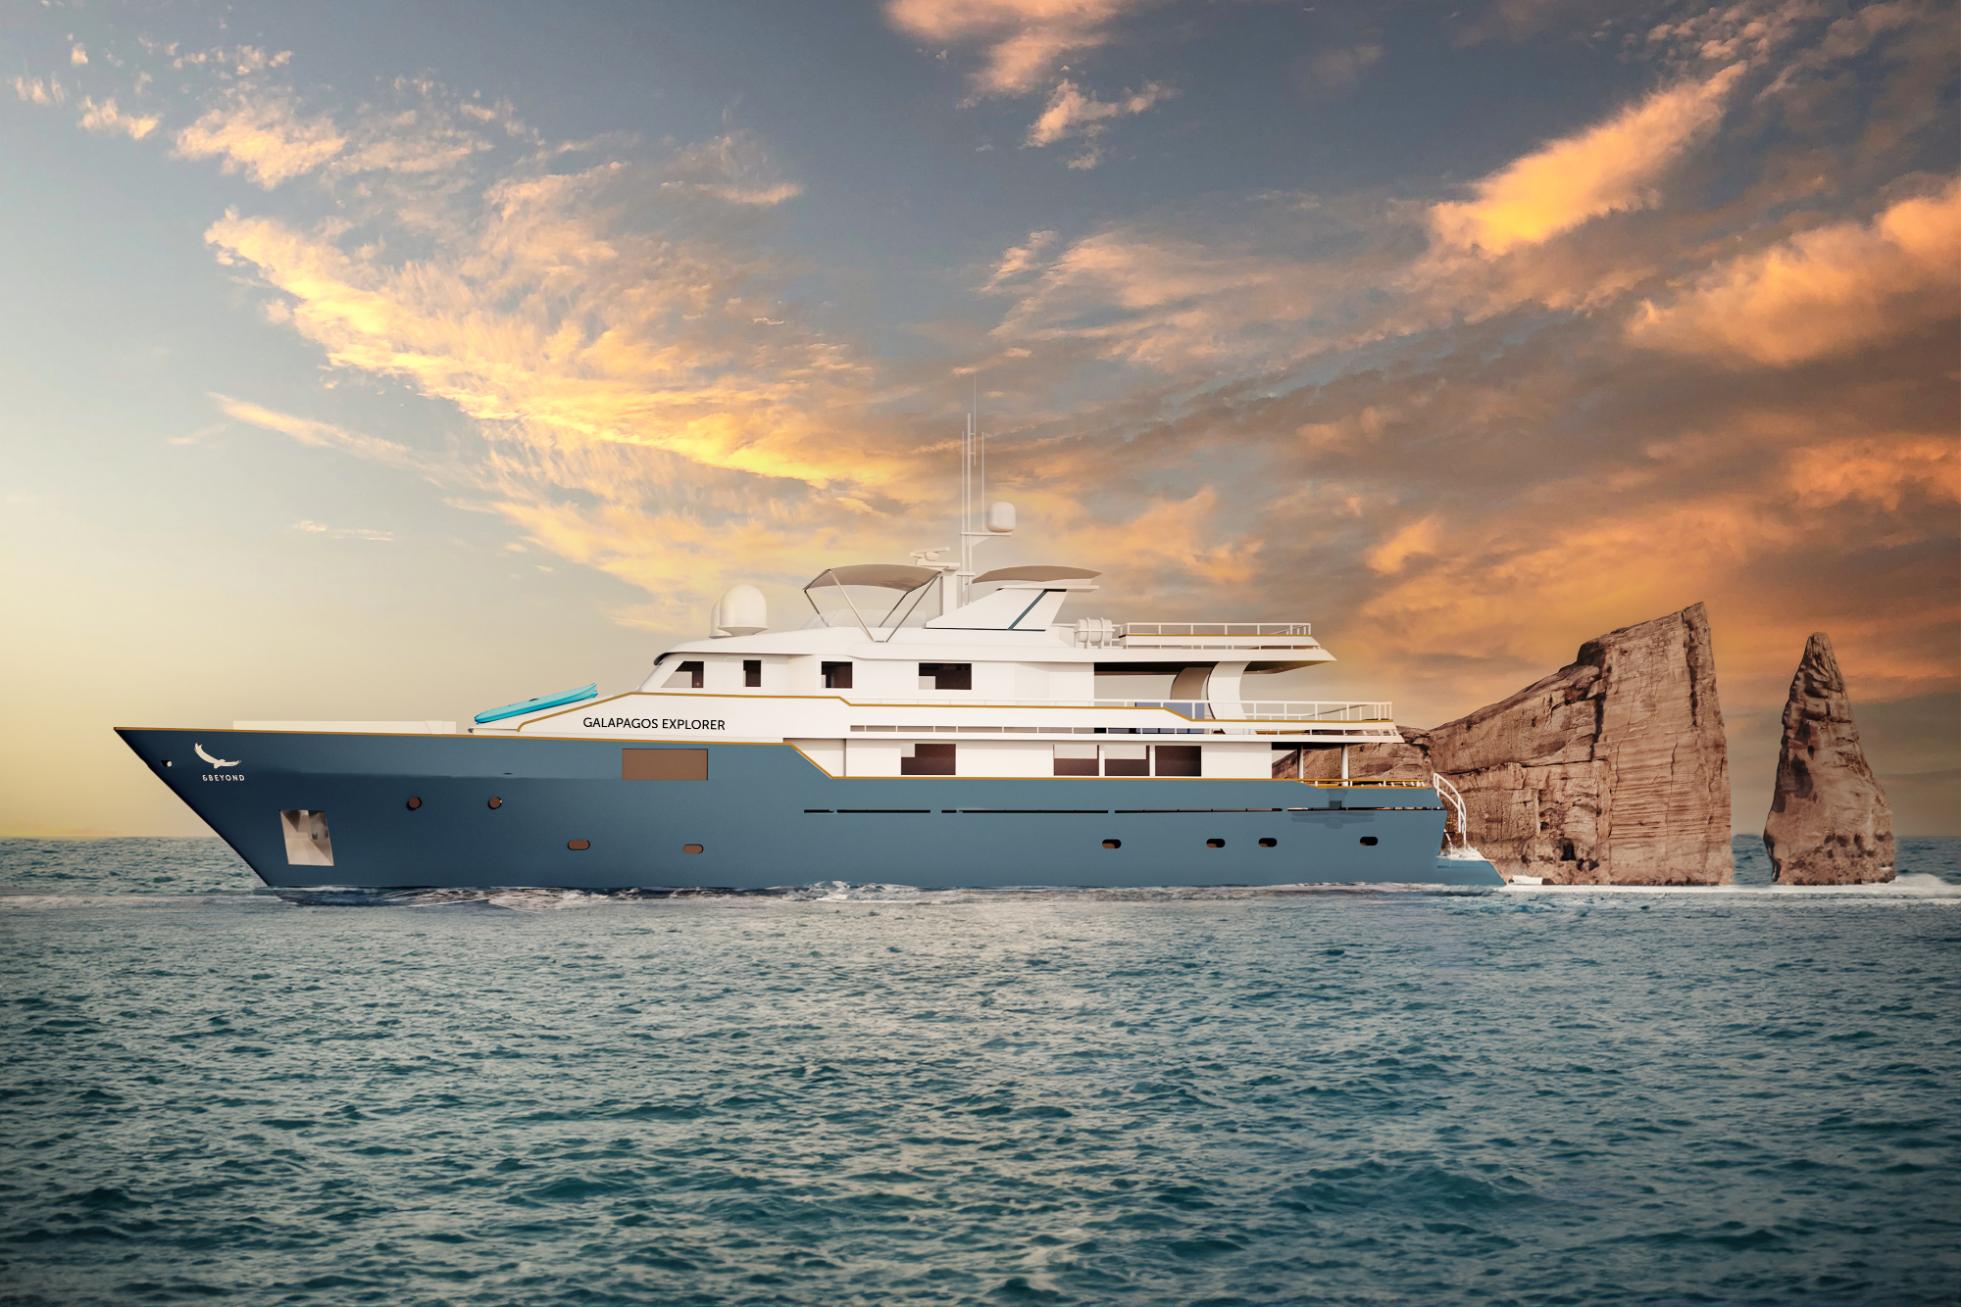 A luxury expedition yacht is debuting in the Galapagos Islands